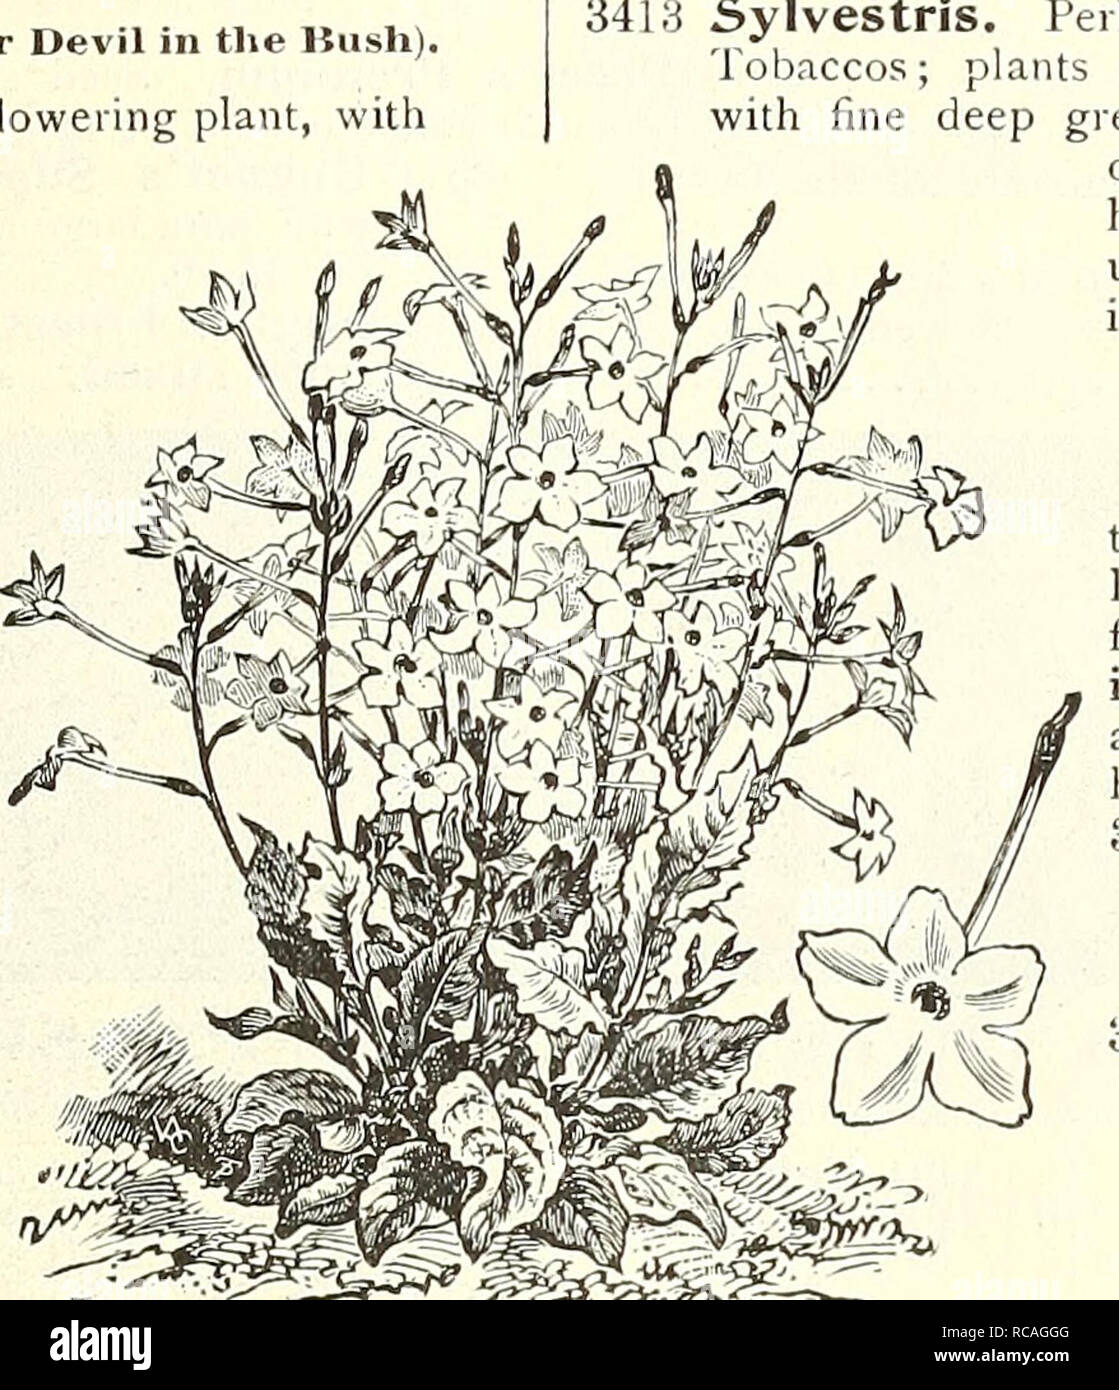 . Dreer's garden book : 1904. Seeds Catalogs; Nursery stock Catalogs; Gardening Equipment and supplies Catalogs; Flowers Seeds Catalogs; Vegetables Seeds Catalogs; Fruit Seeds Catalogs. OxALis Trop;eoloides. NIBREMBCRGIA (Cup Flo^ver). A half-hardy perennial, slender-growing plant, perpetually in bloom, flower- ing the first year if sown early ; desirable for tlie greenhouse, baskets, vases, or l)edding out; 1 foot, 3421 Frutescens. While, tinted with lilac 10 NlGELLA DaMASCENAC (Love in a Mist, or Devil in the IJush). NIGEI.I.A 3430 Damascena. A compact, free-flowering plant, with linely-cut  Stock Photo